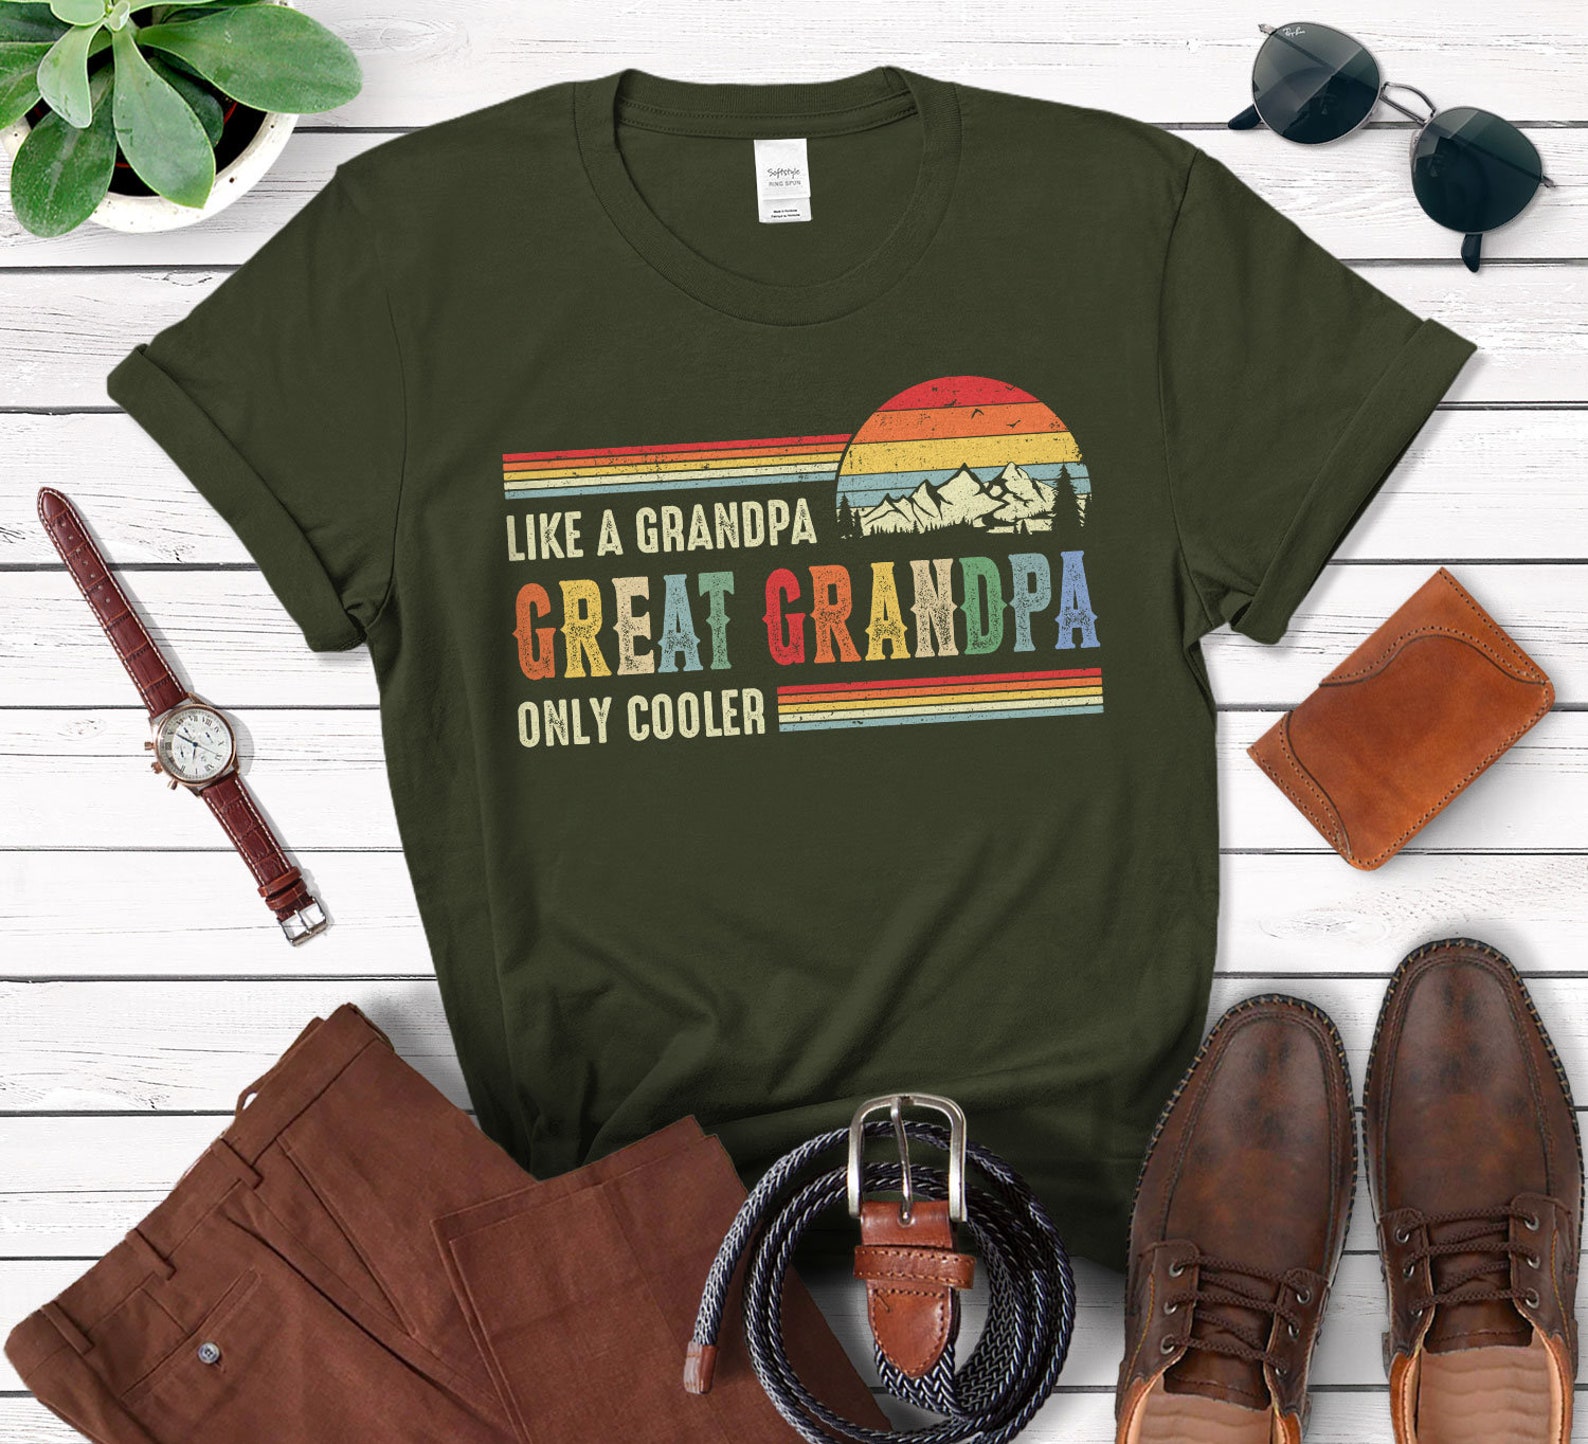 Great Grandpa Like a Grandpa Only Cooler Shirt for Men Vintage | Etsy